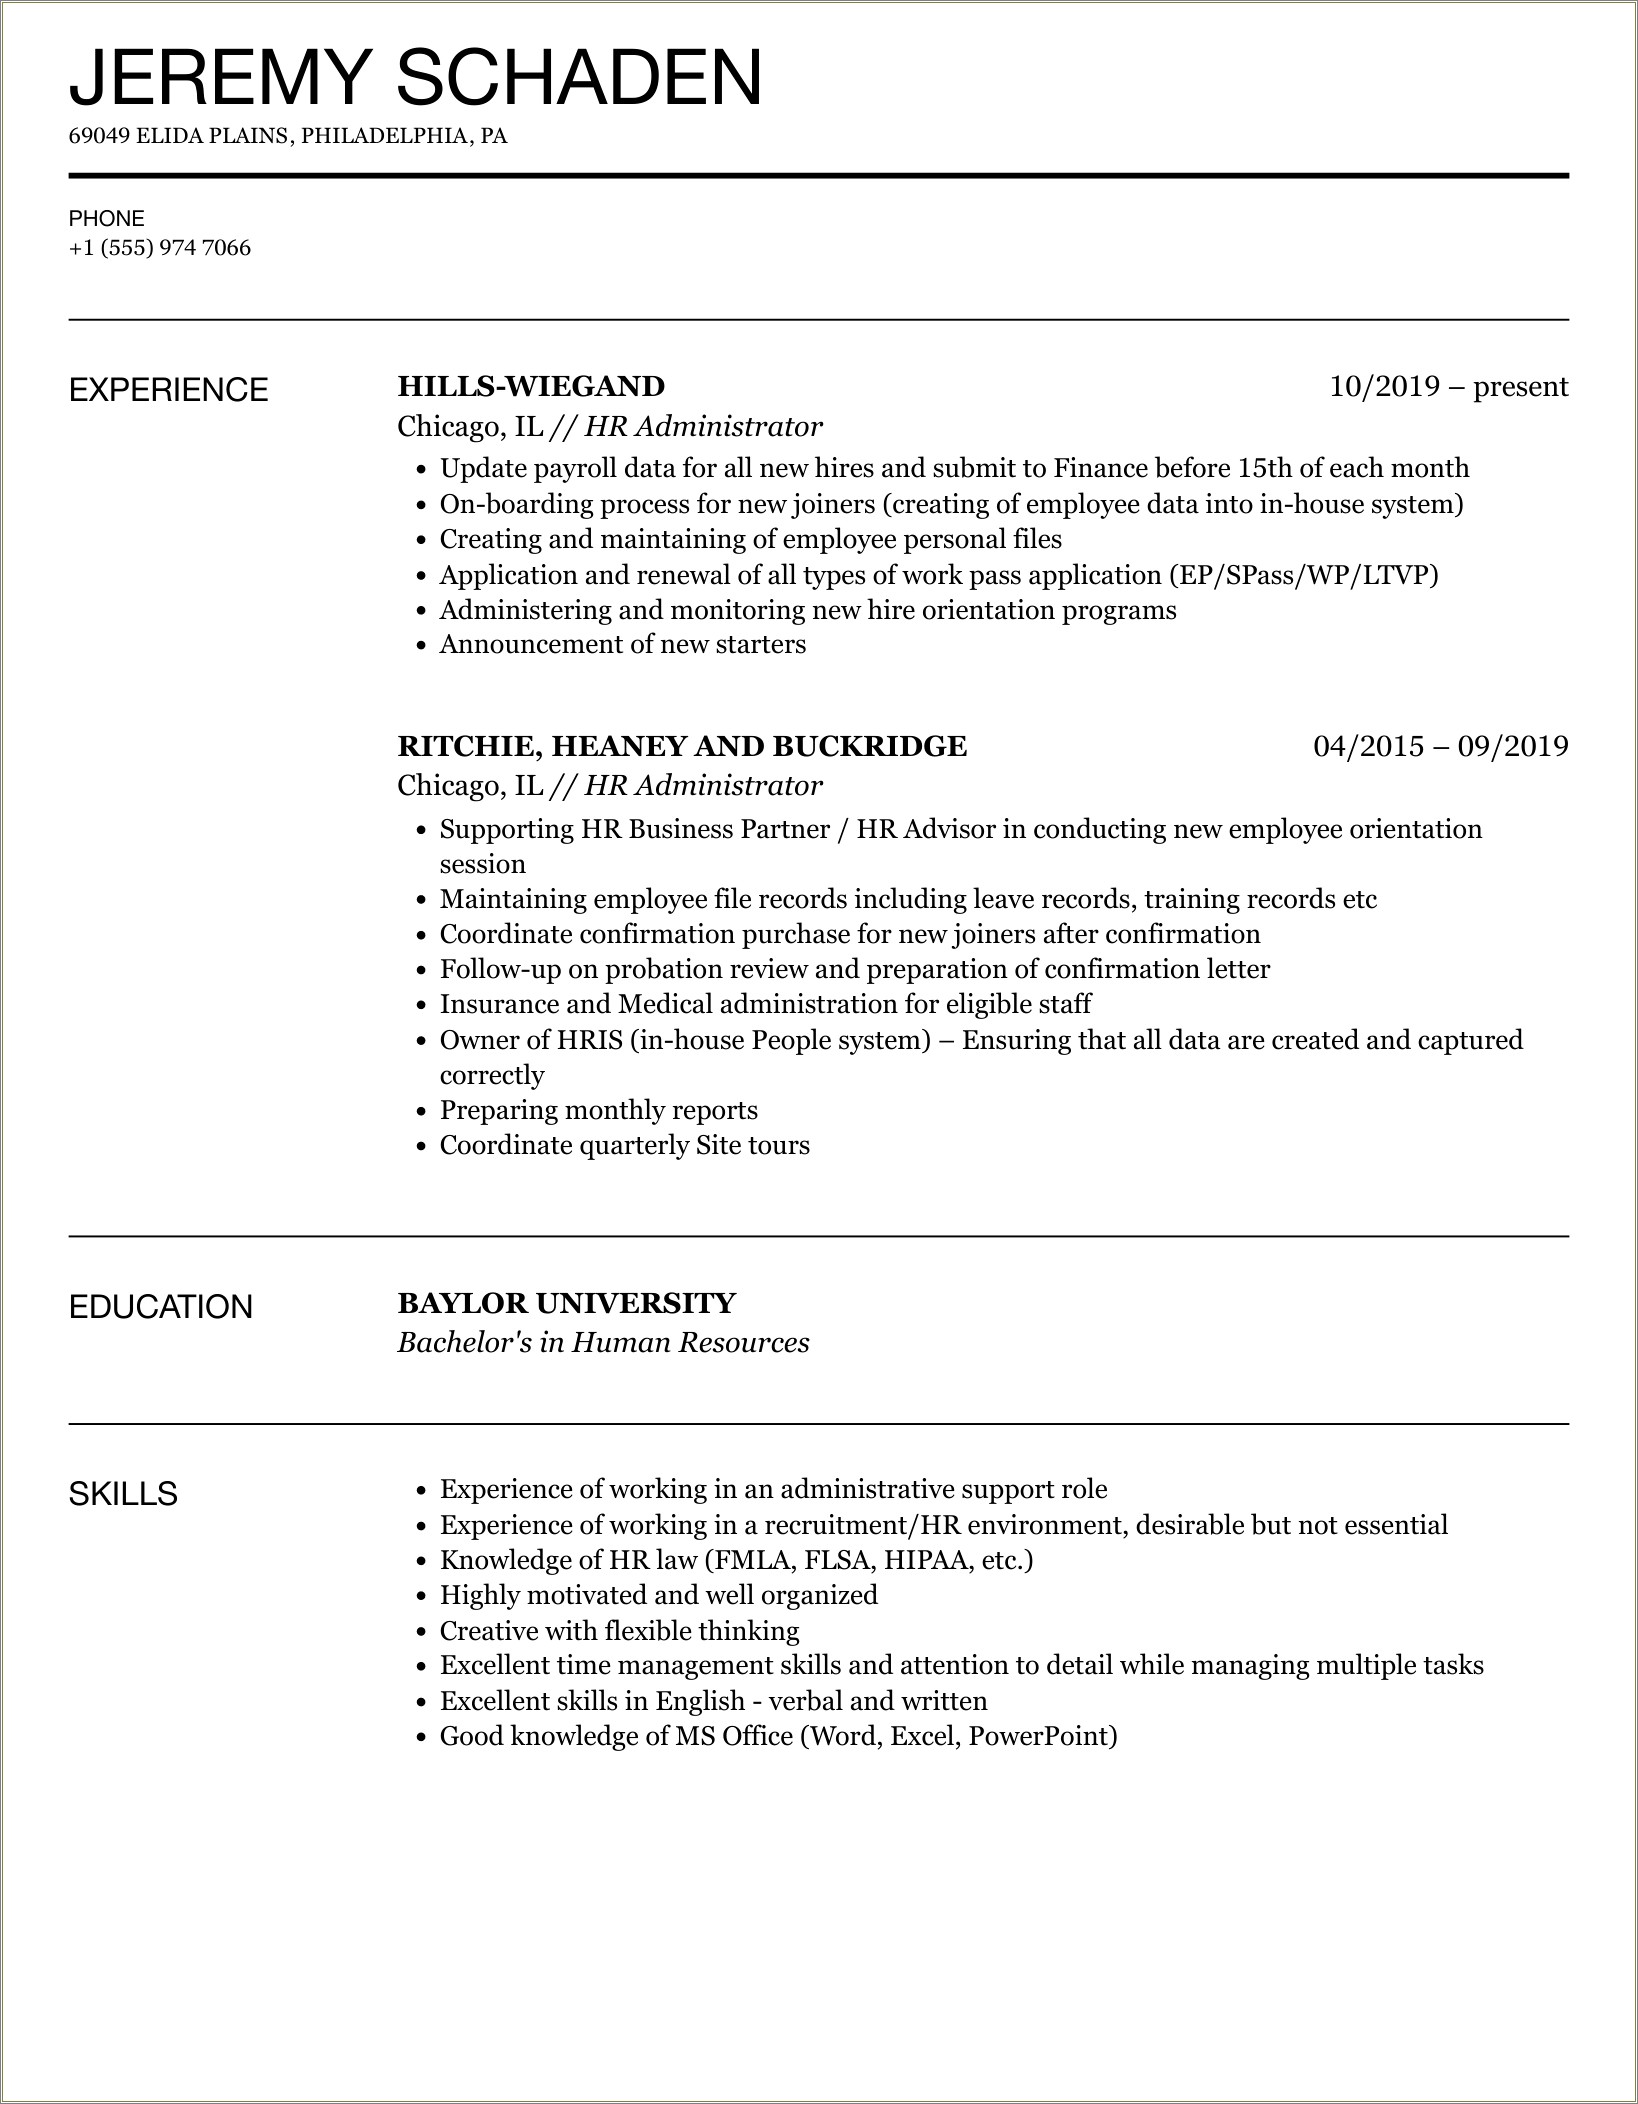 Human Resources Administrative Responsibilities And Resume Summary Samples